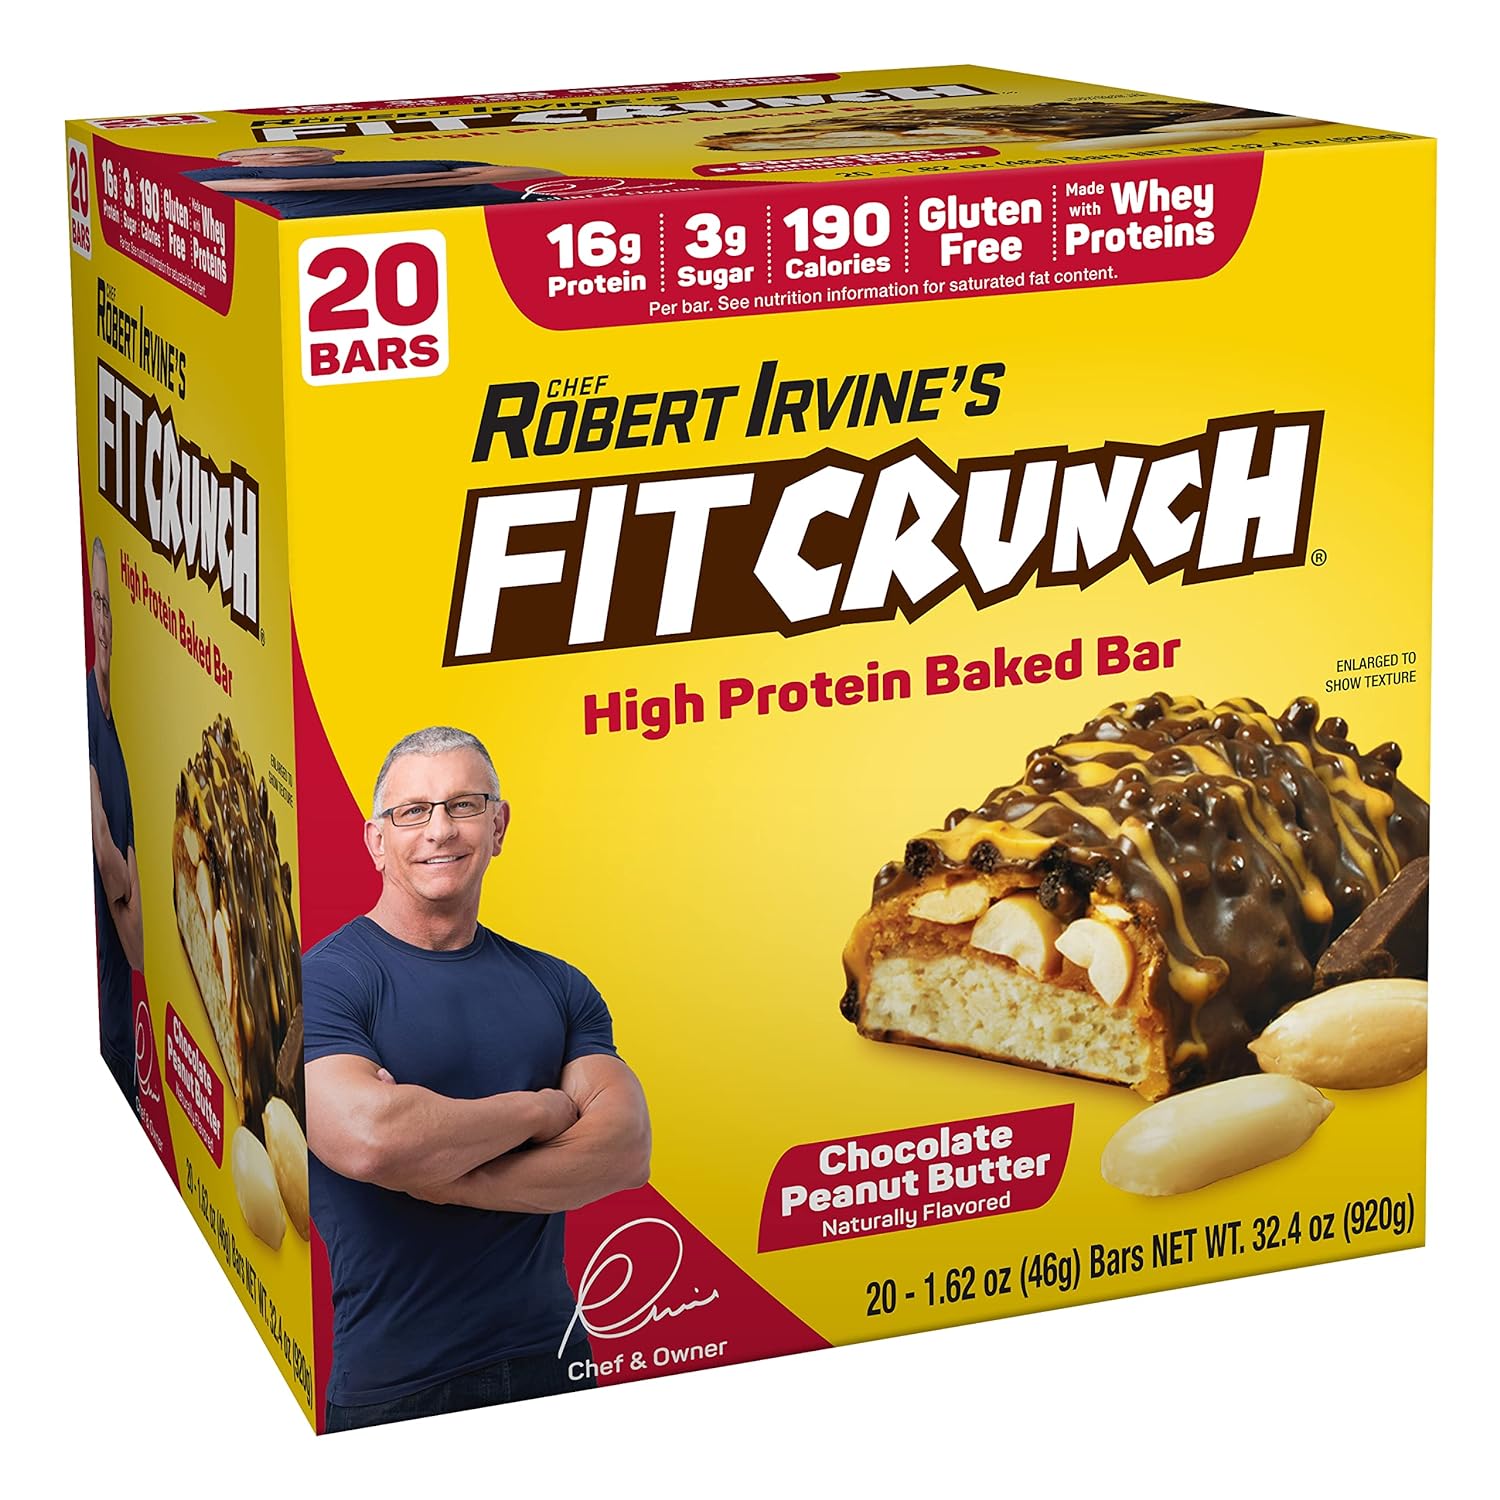 FITCRUNCH Protein Bars, Snack Size Value Pack, Gluten Free, Made with